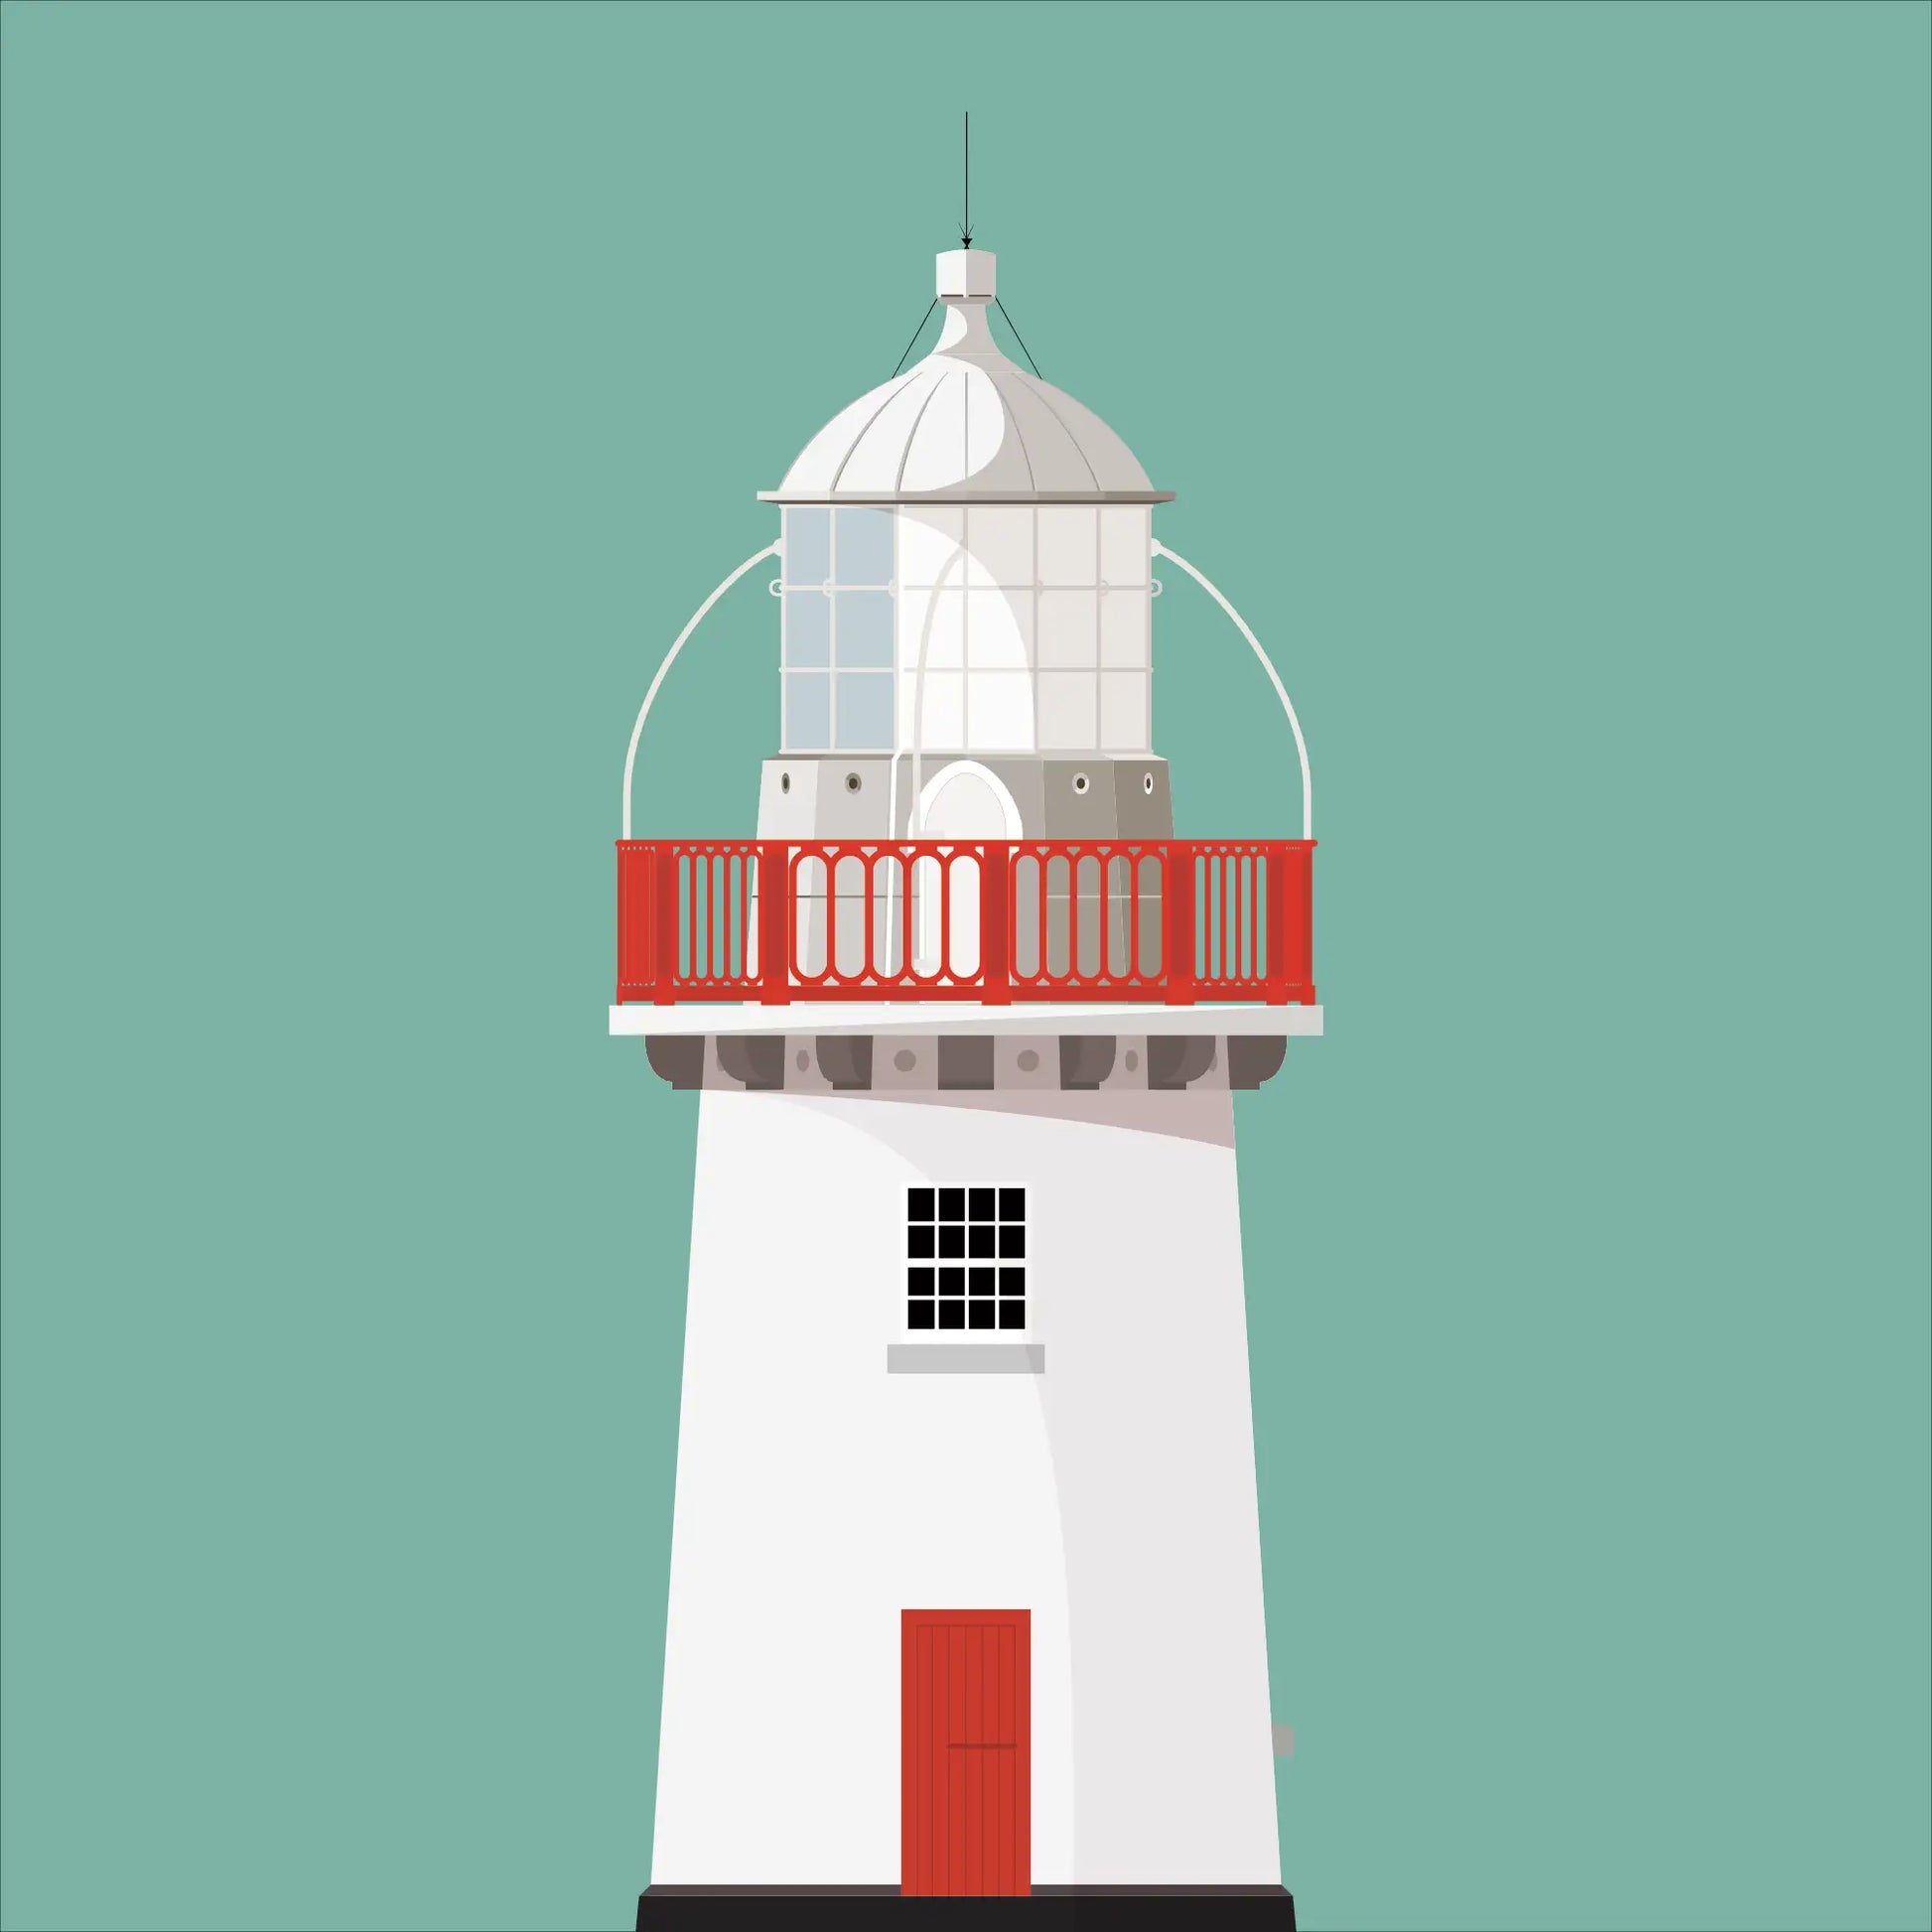 Illustration of Youghal lighthouse on a white background inside light blue square.